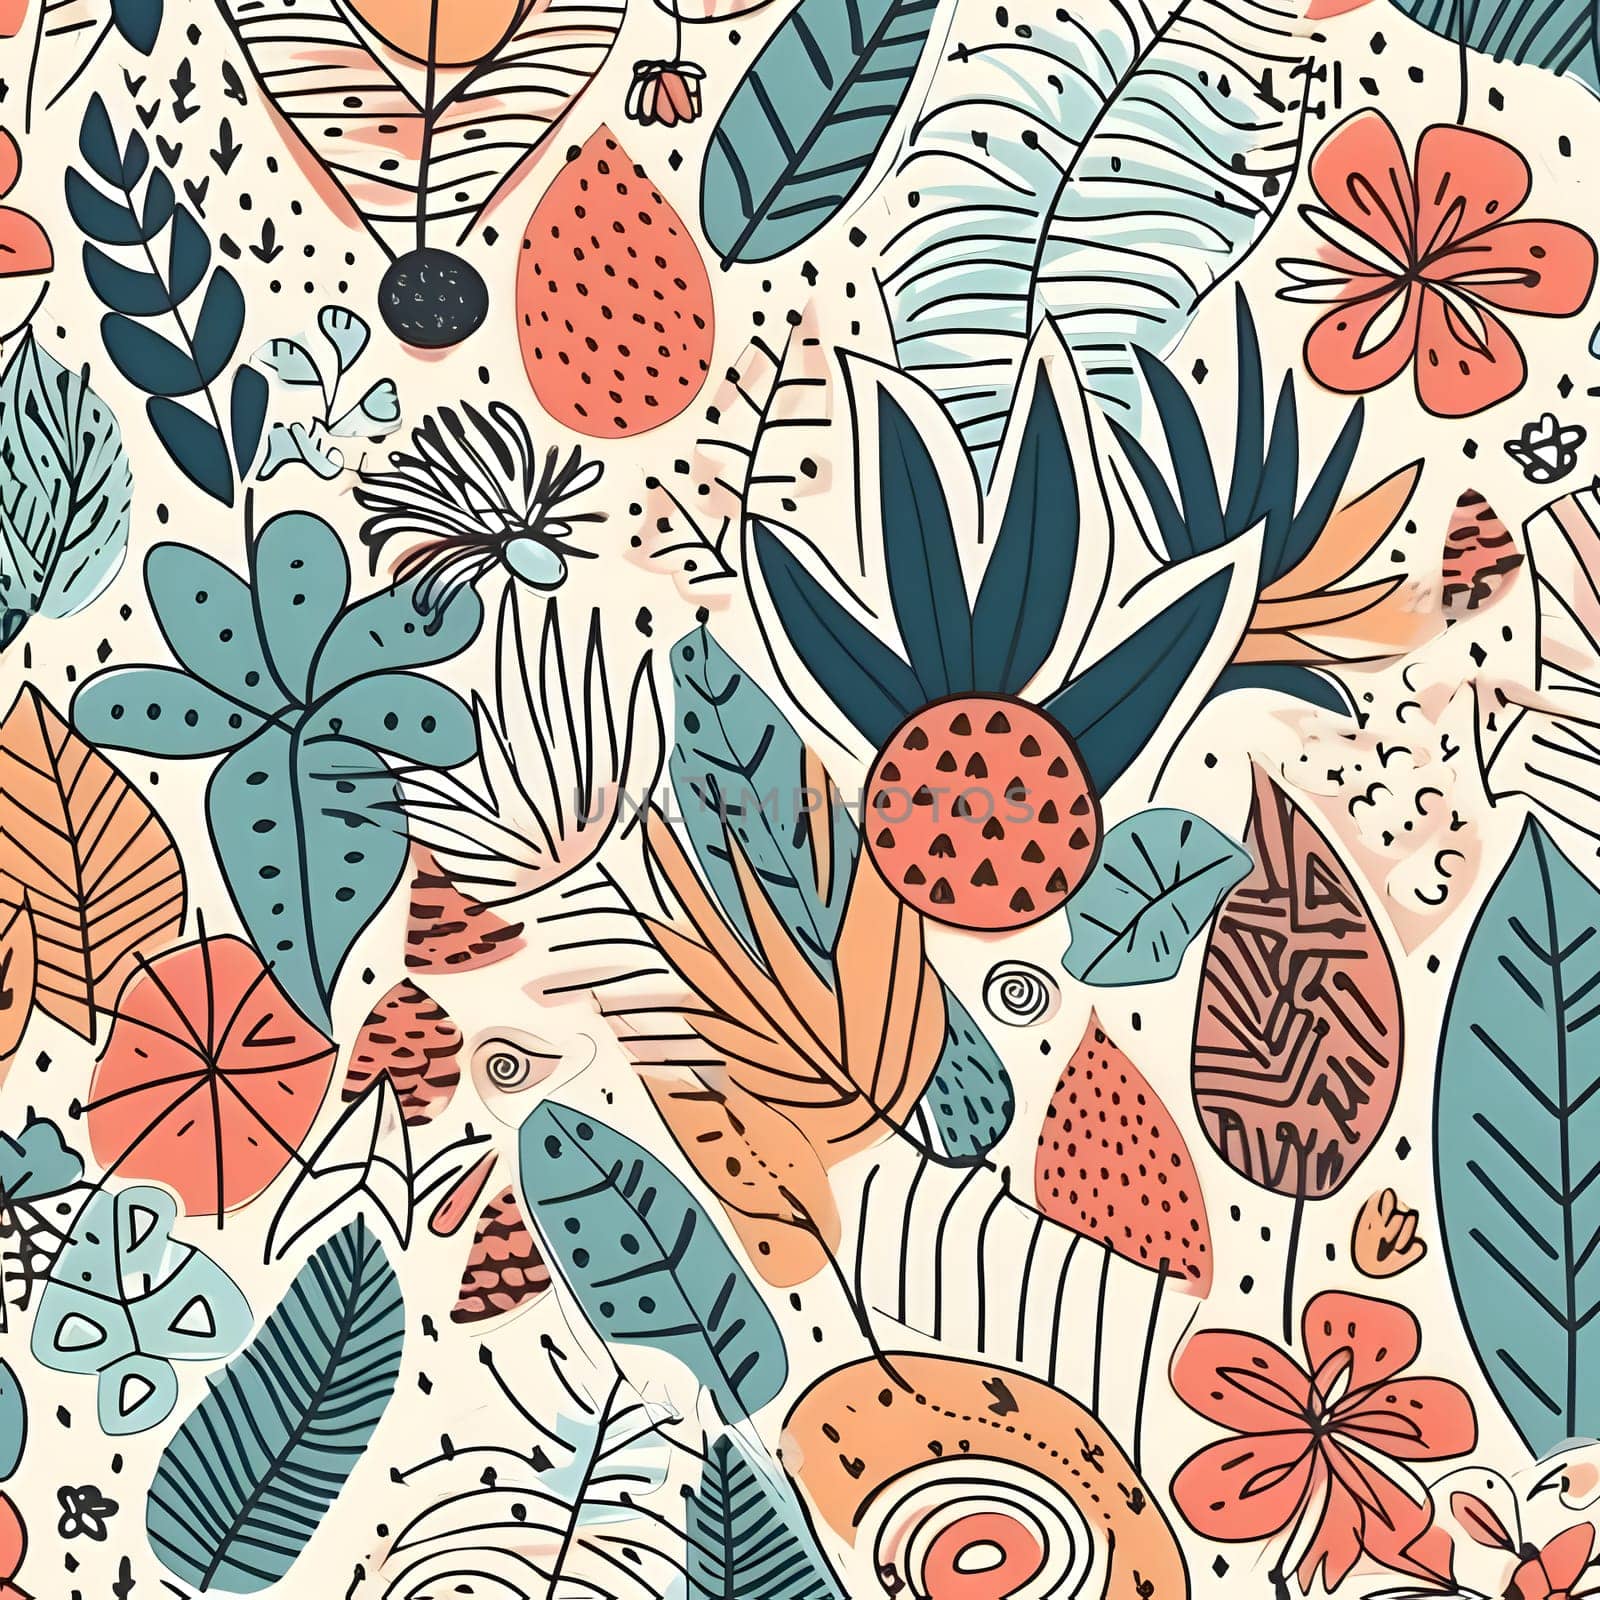 Patterns and banners backgrounds: Seamless pattern with tropical leaves and flowers. Vector illustration.